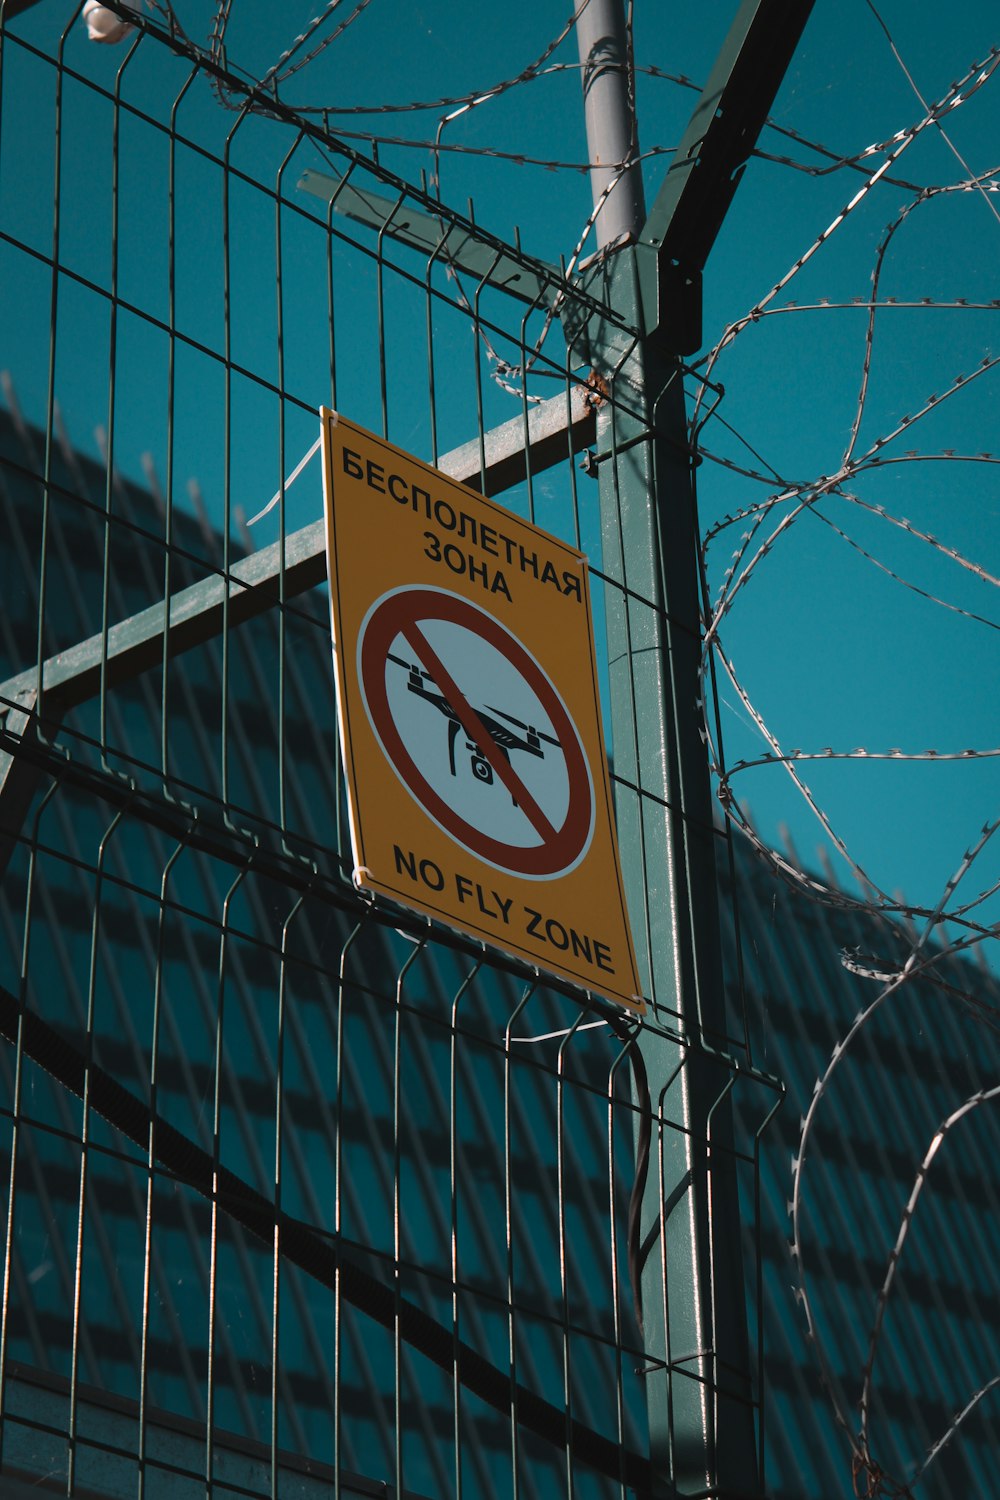 a no fly zone sign hanging on a fence